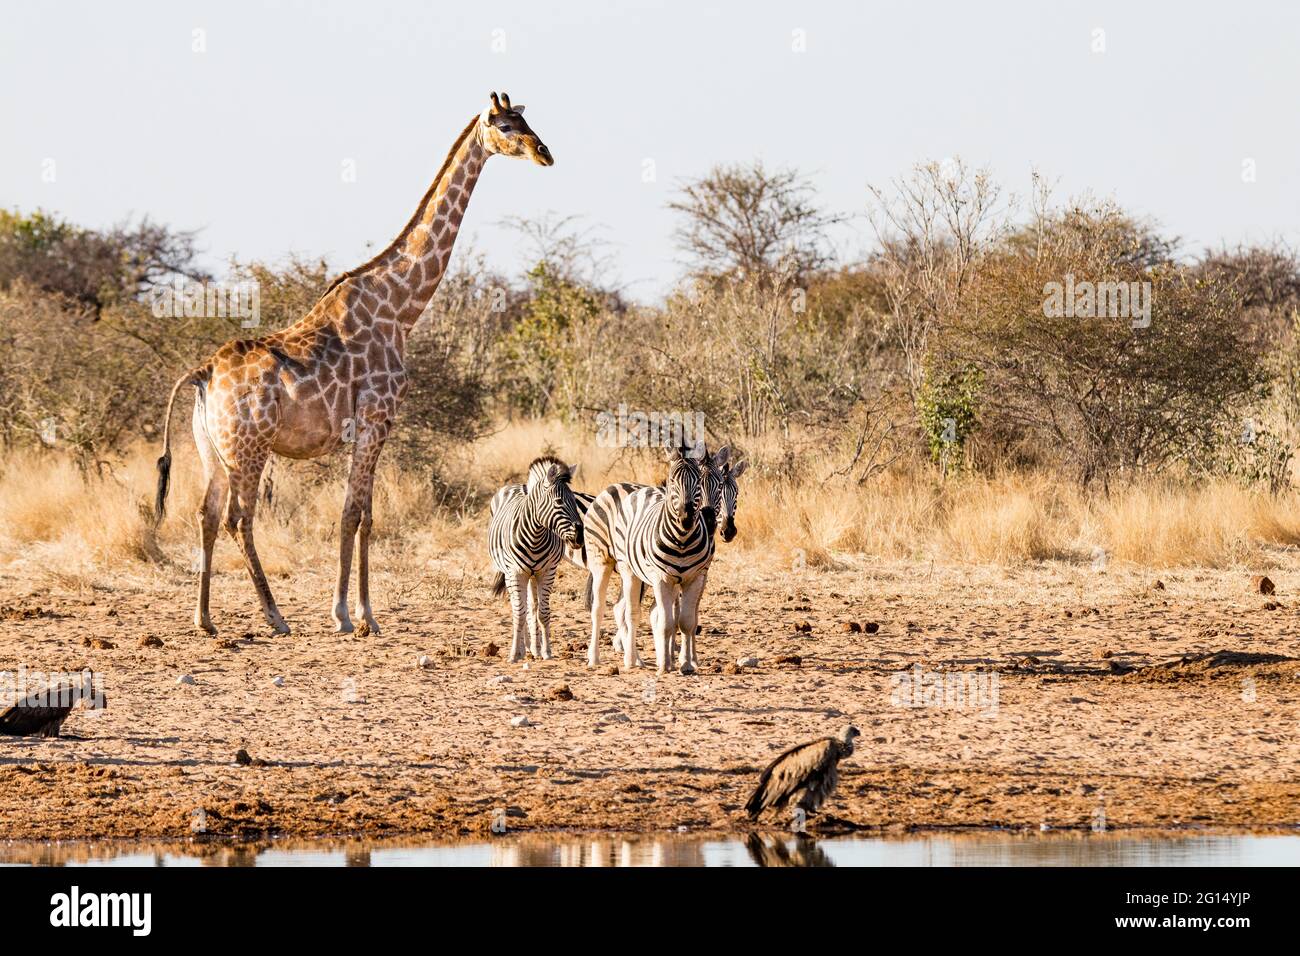 Meeting at a waterhole in Etosha National Park, Namibia. a giraffe, several zebras and two vultures peacefully enjoy the drinking water Stock Photo